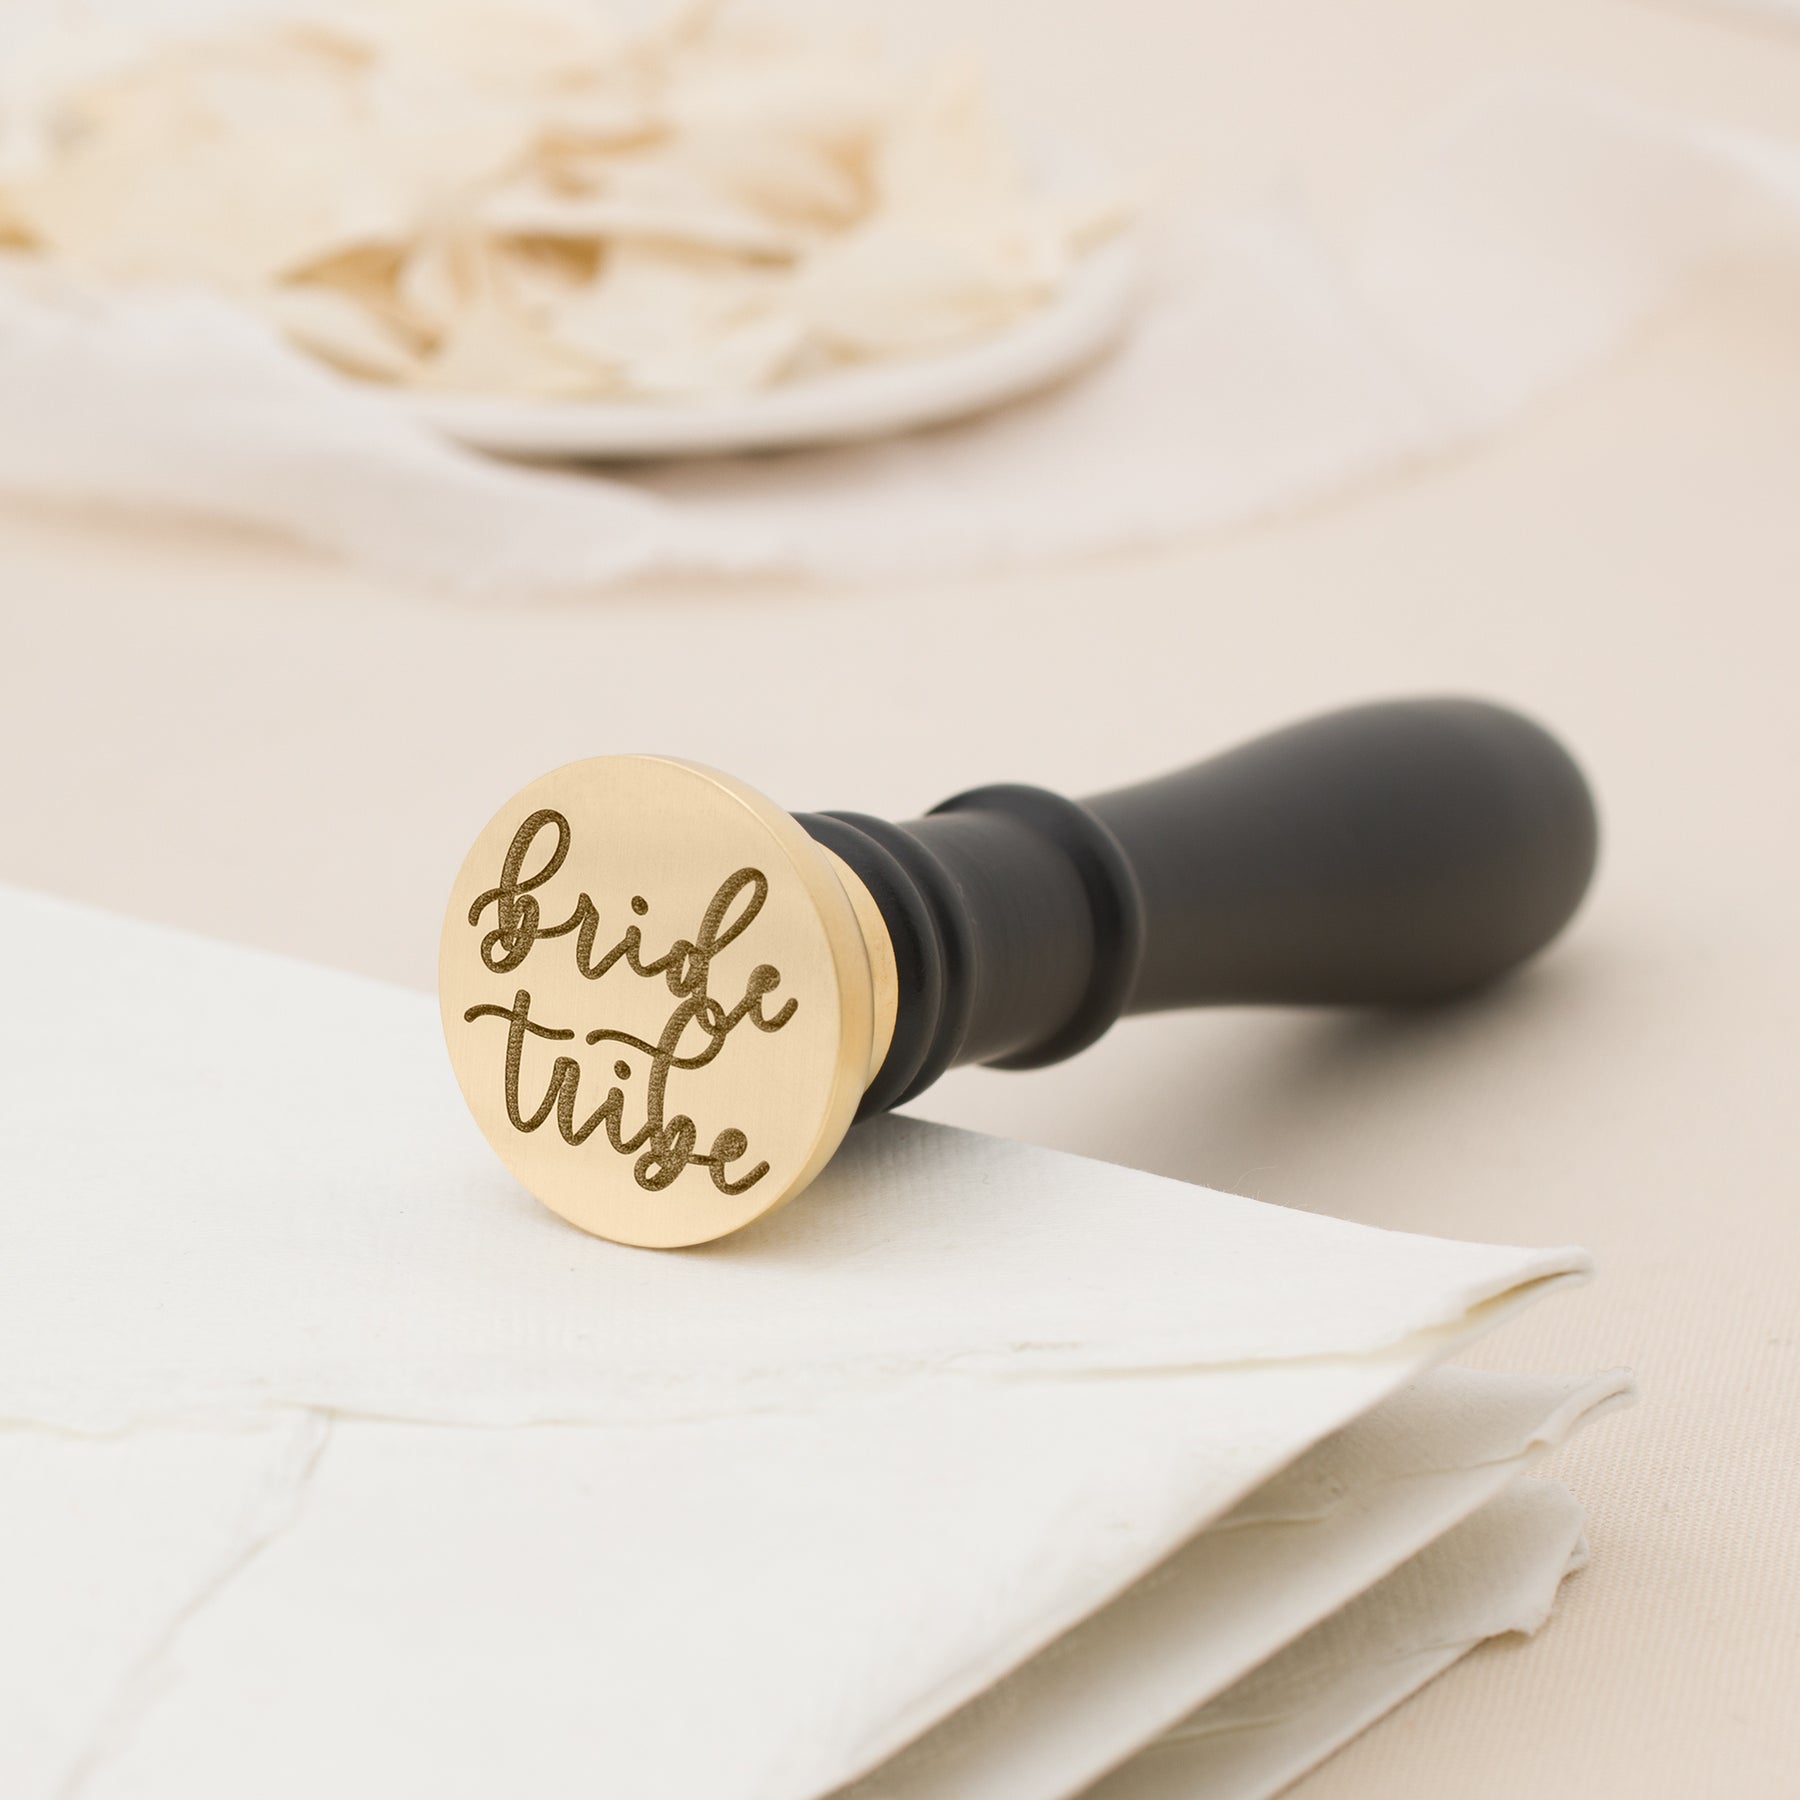 Bride Tribe Wax Stamp